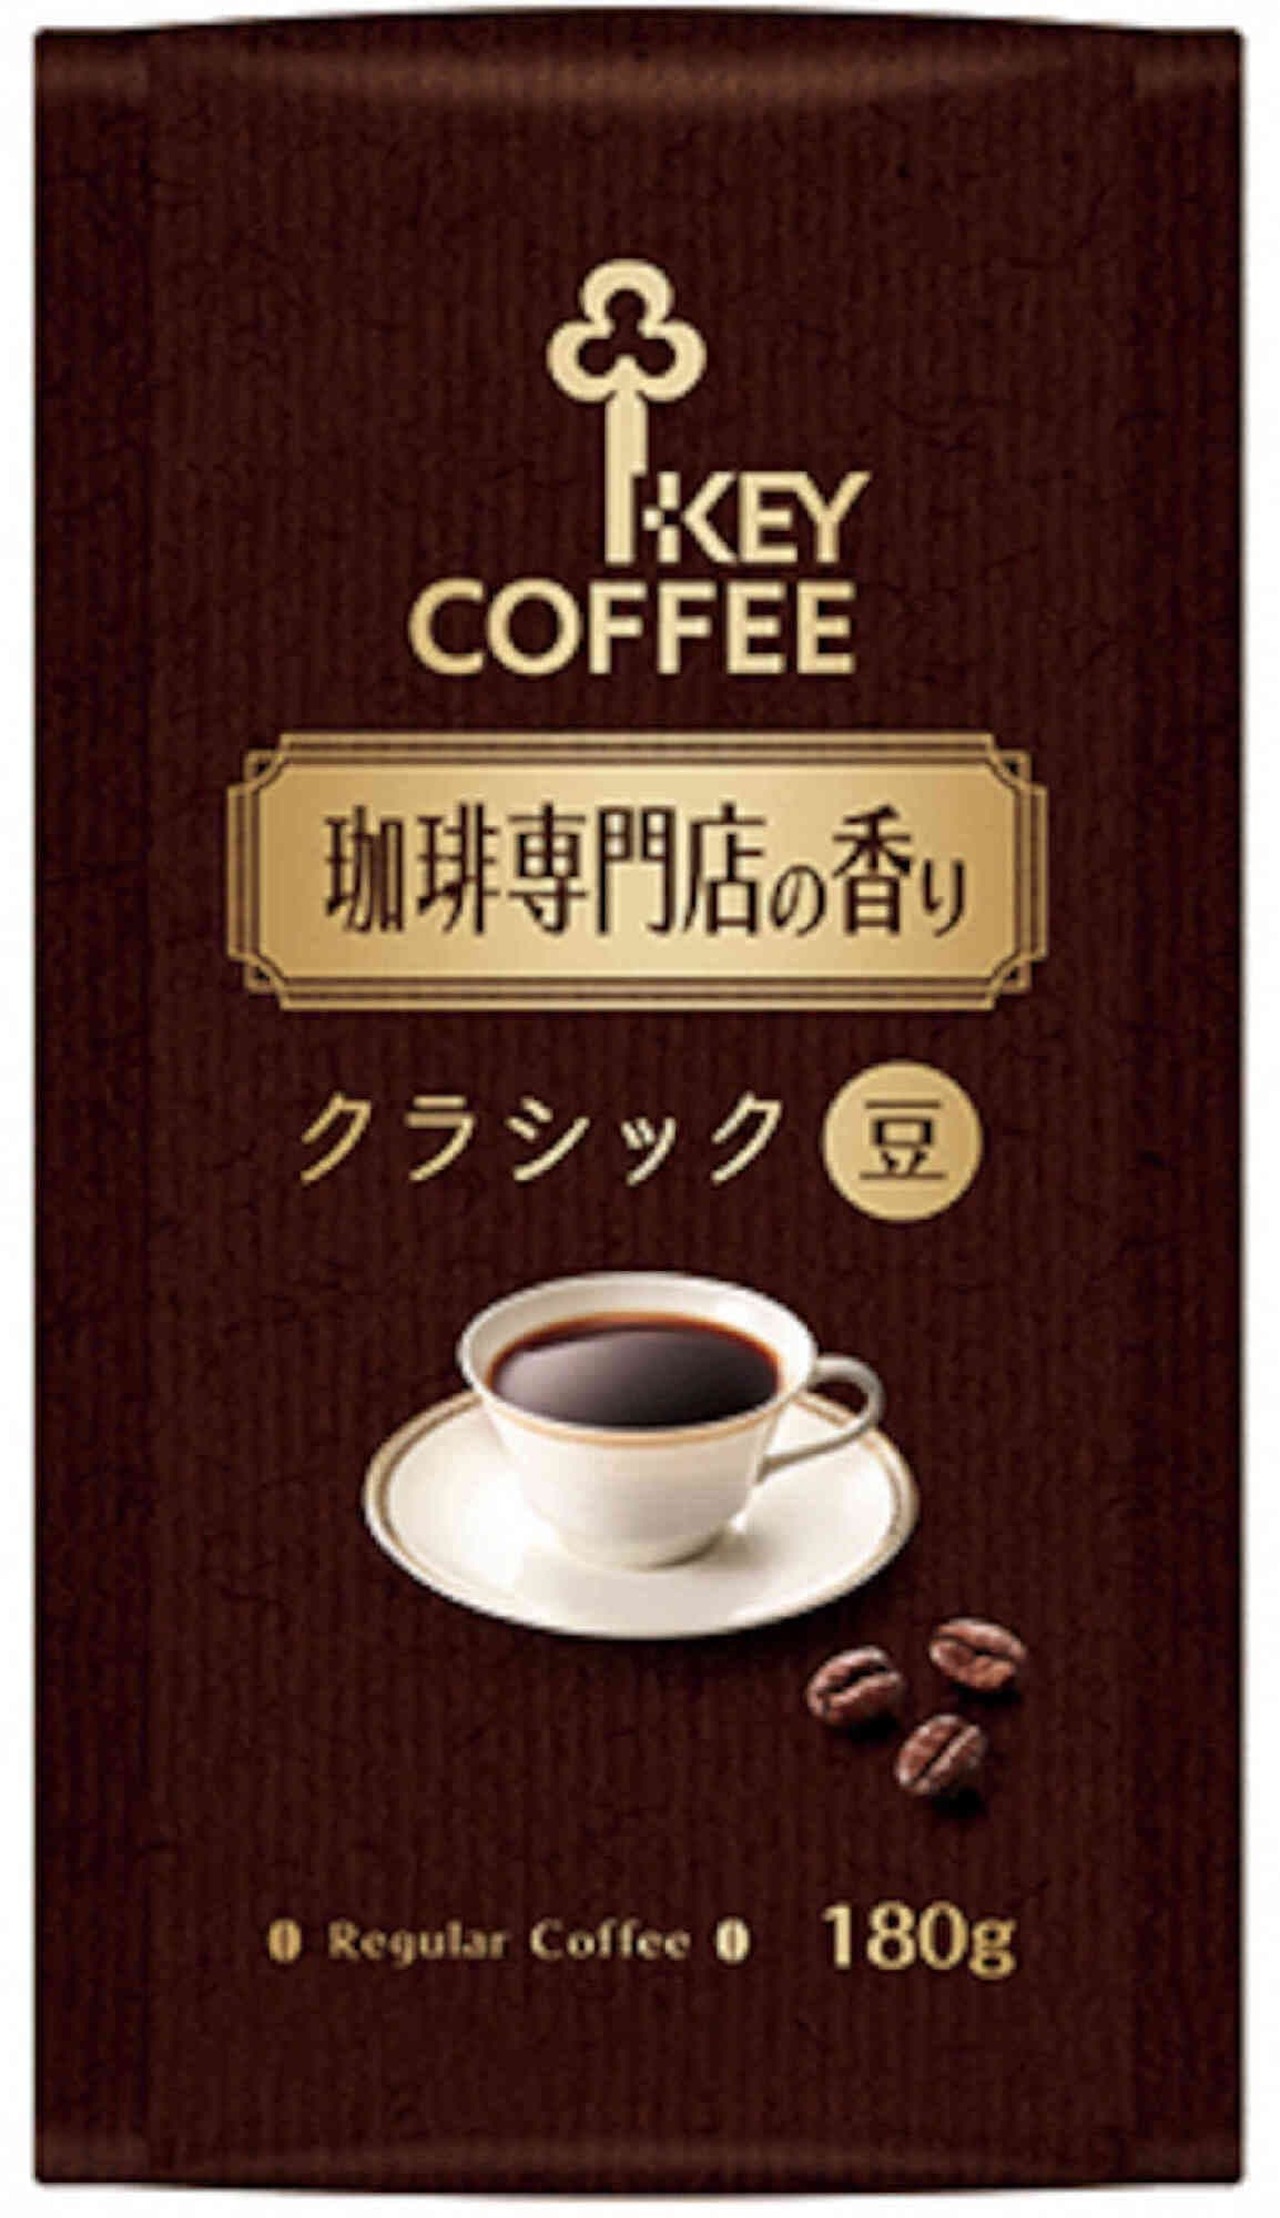 Key coffee "Coffee specialty store scent blended coffee" "Coffee specialty store scent classic"